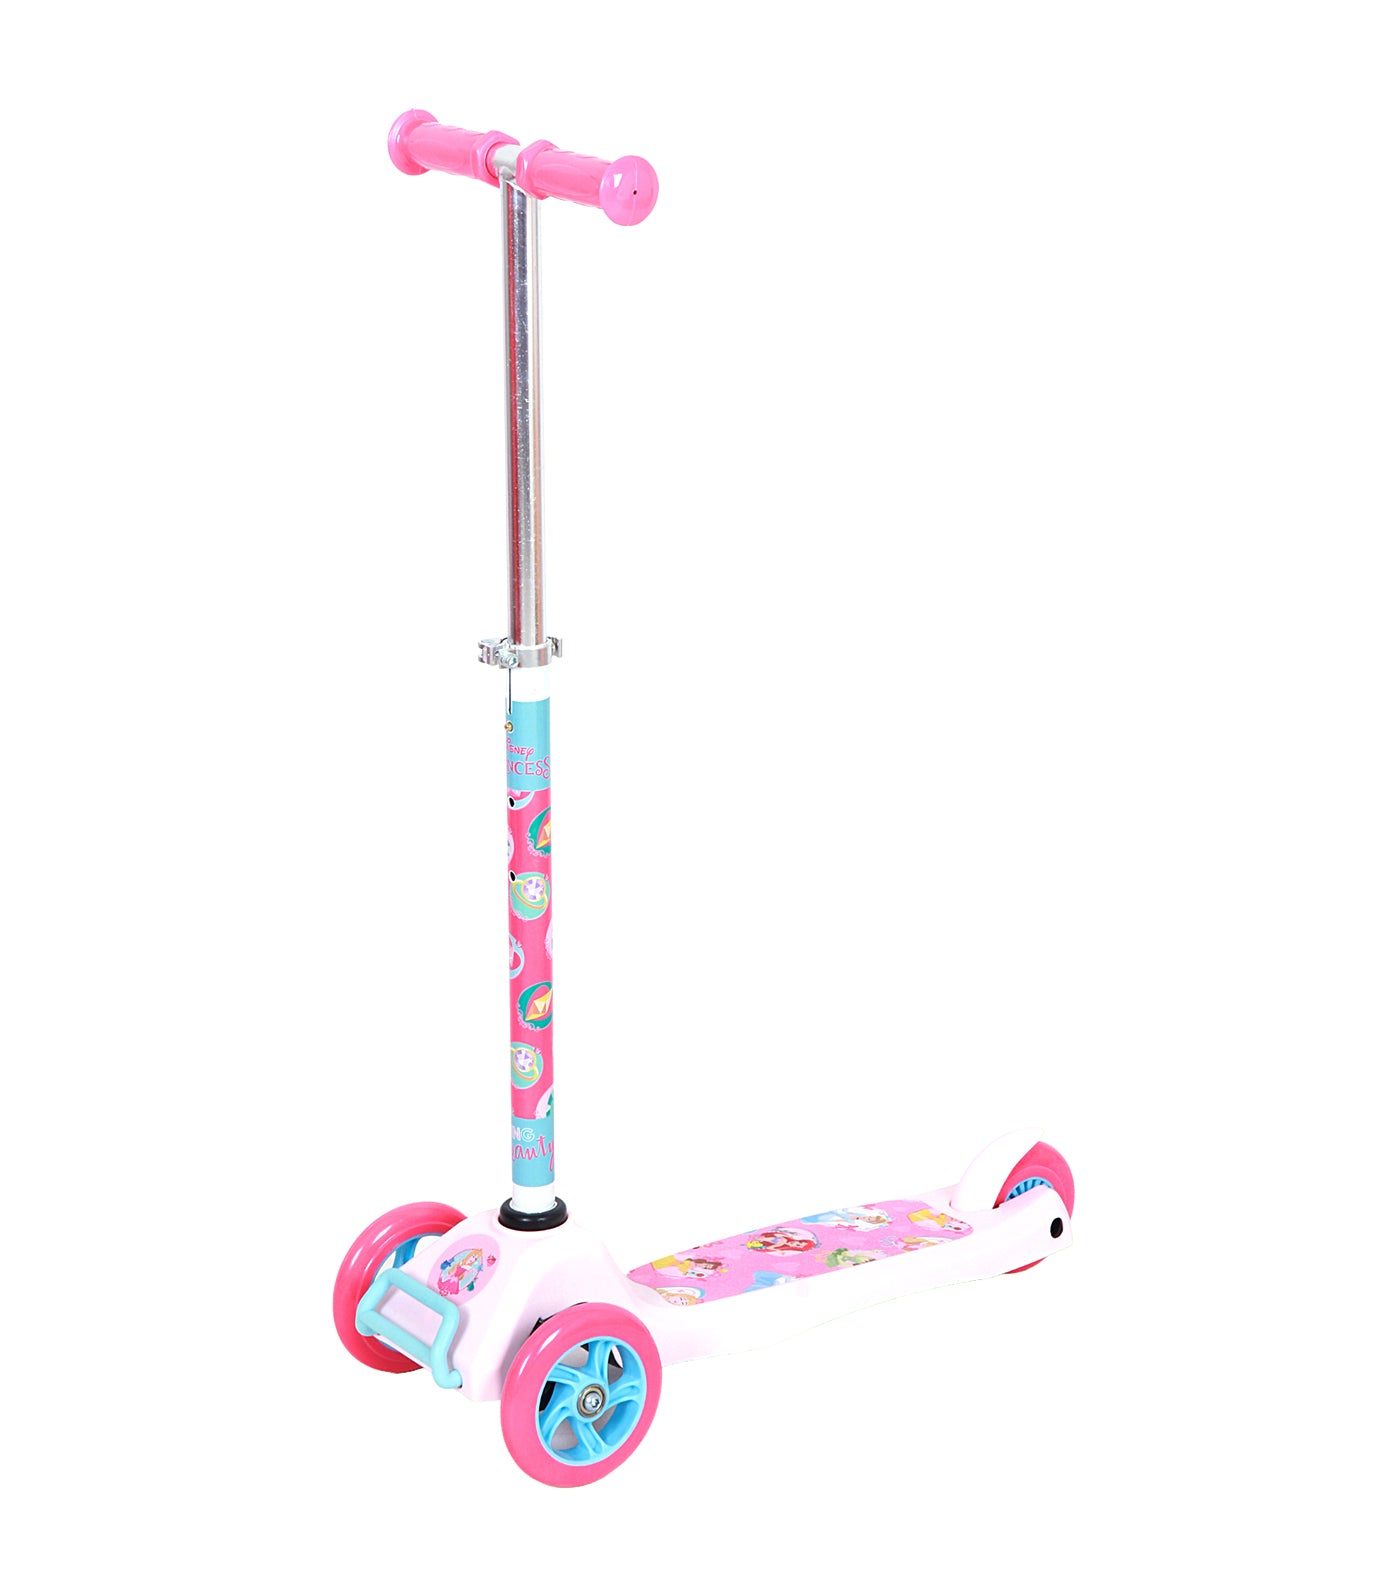 Princess Adjustable Twist Scooter Pink and Blue